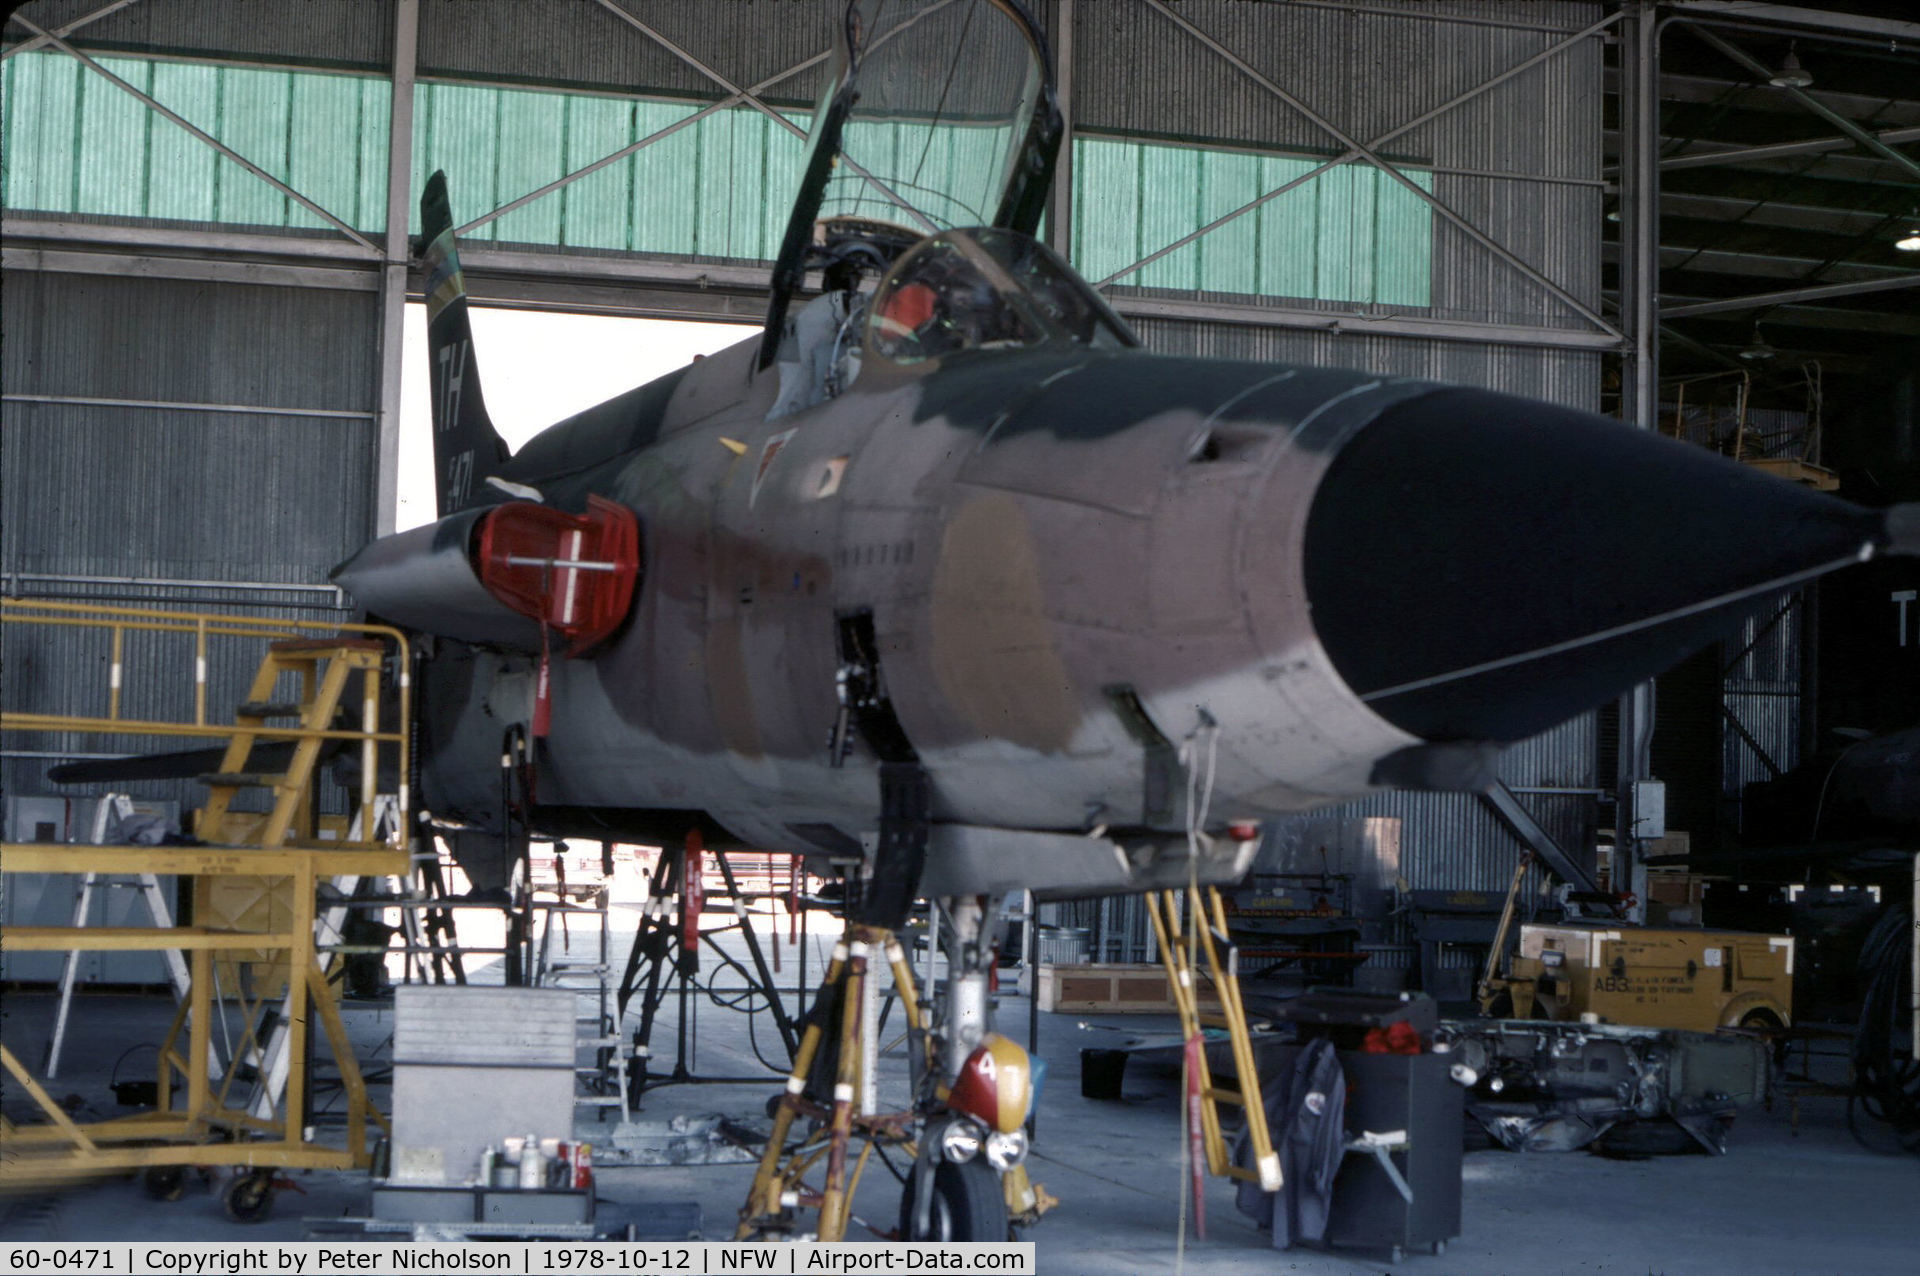 60-0471, 1960 Republic F-105D Thunderchief C/N D159, F-105D Thunderchief of the Commanding Officer 457th Tactical Fighter Squadron/301st Tactical Fighter Wing undergoing maintenance at Carswell AFB in October 1978.